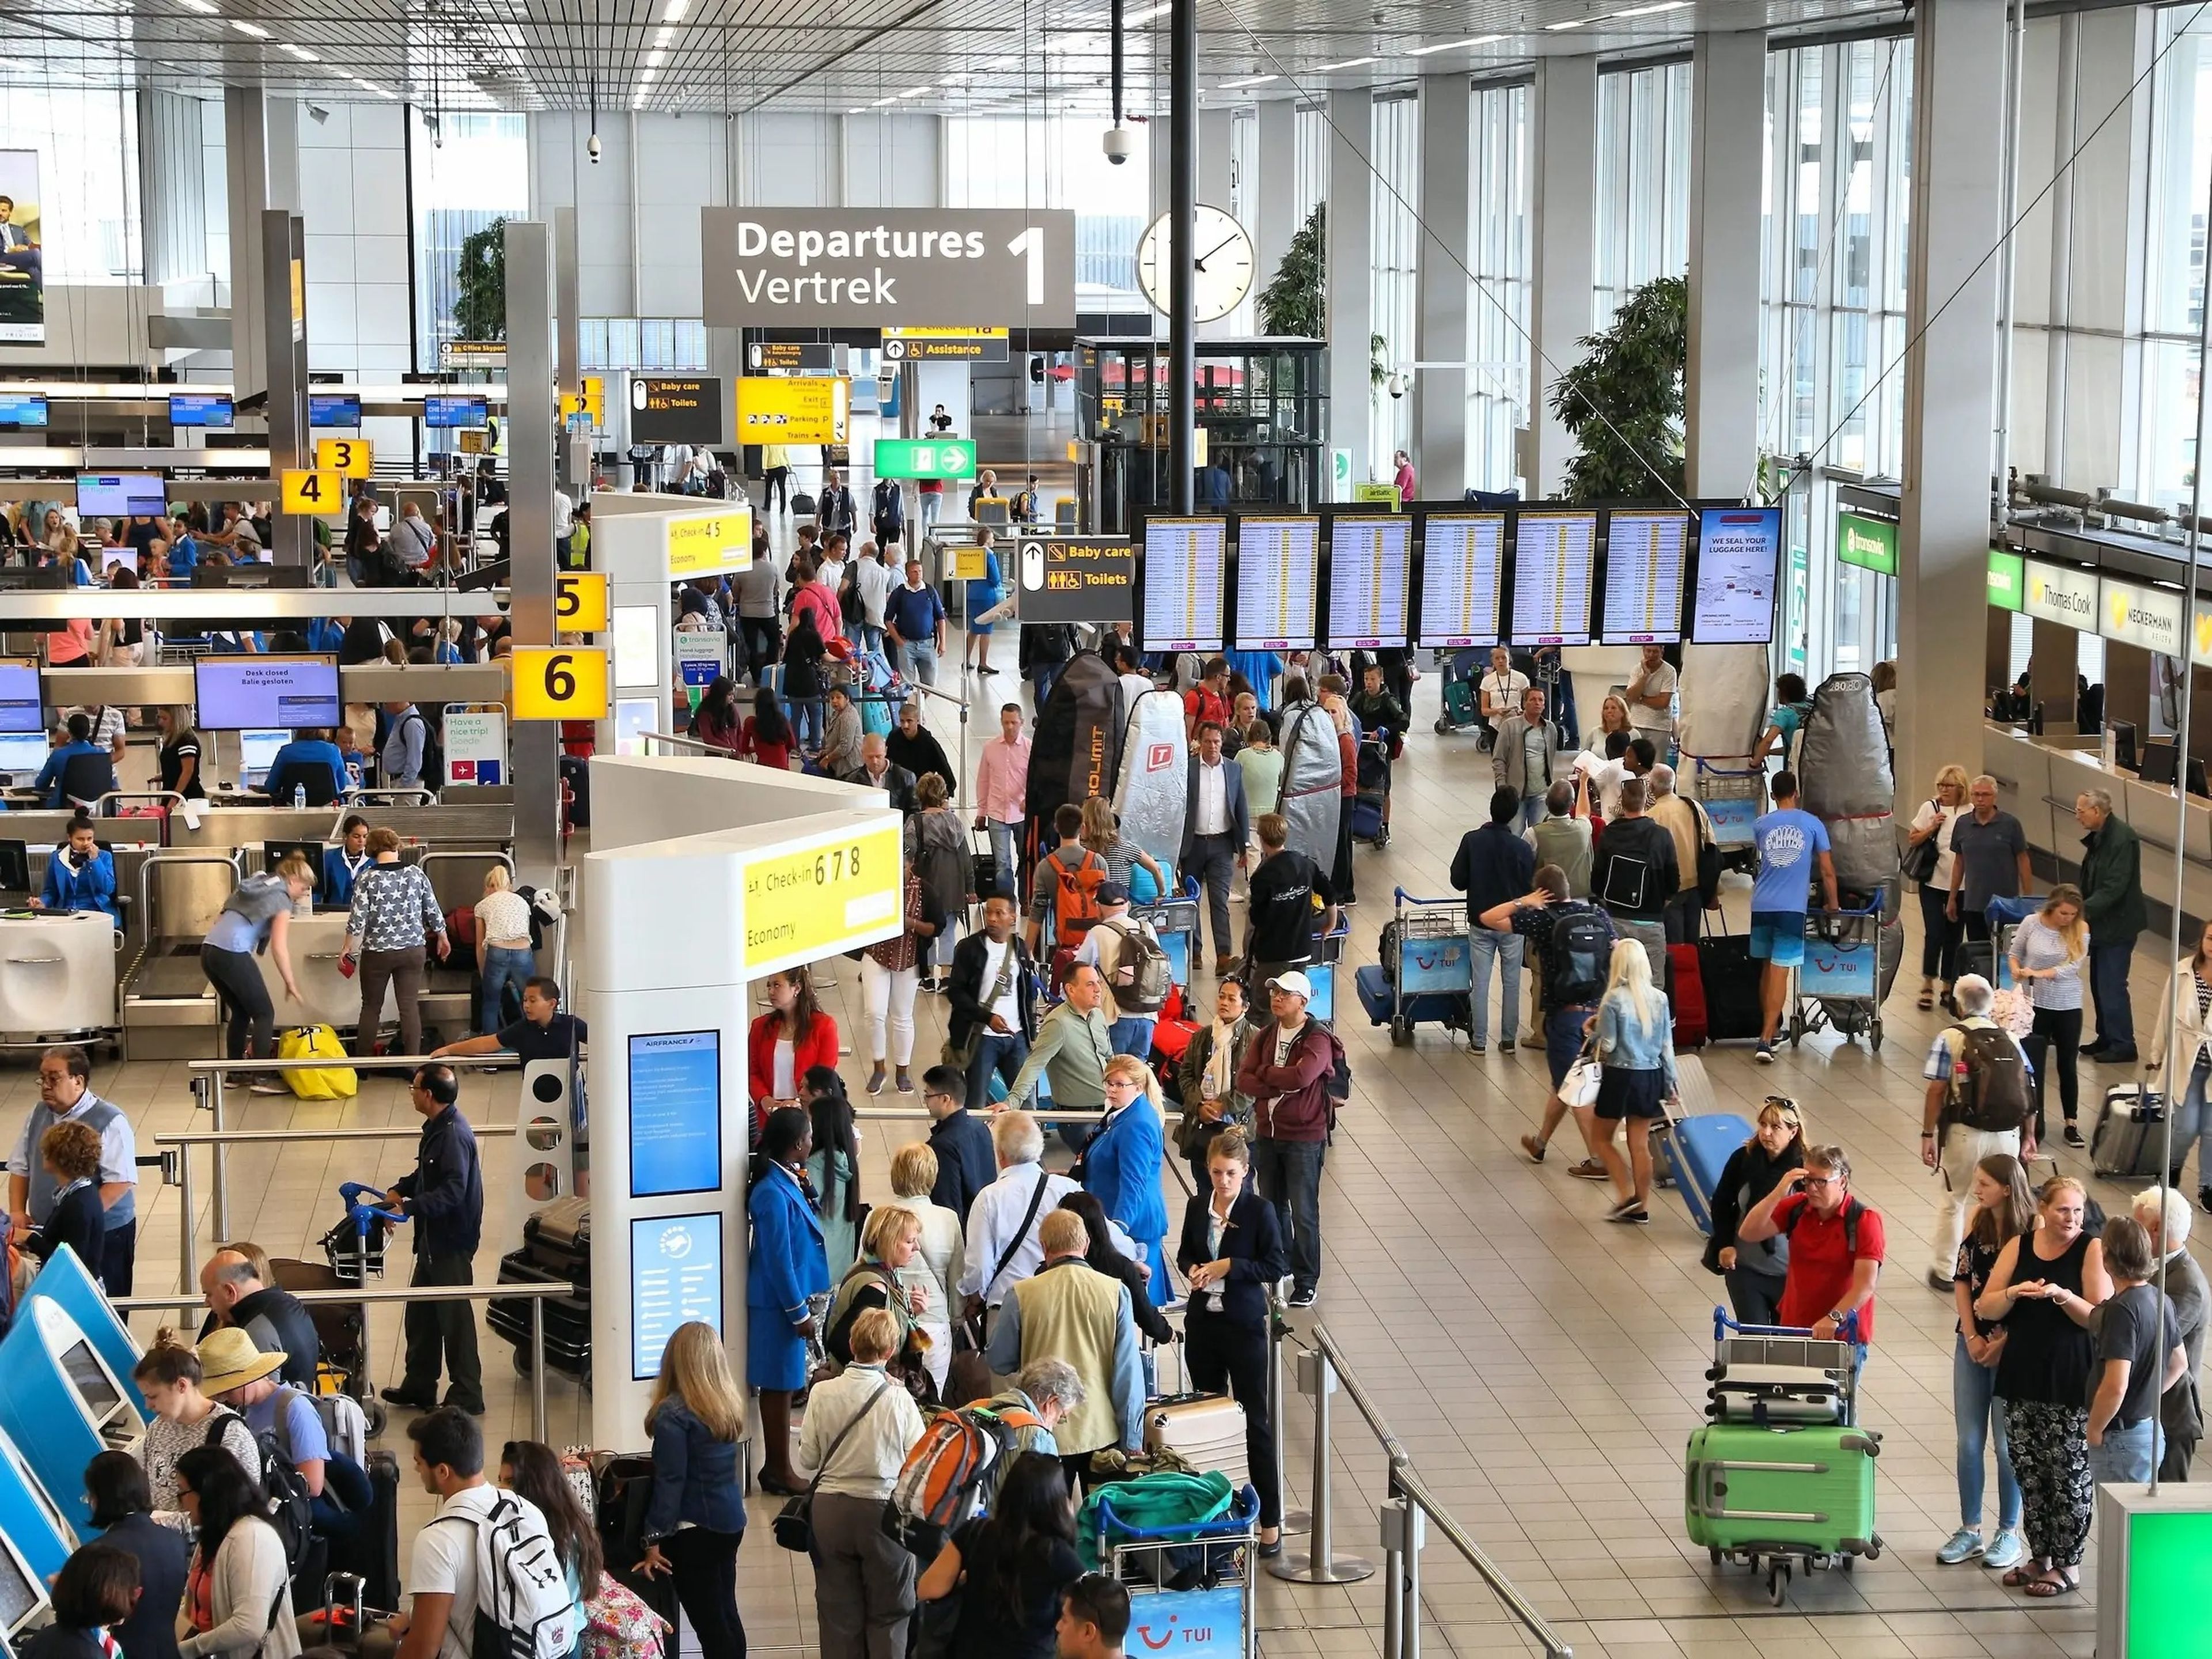 busy airport crowded with passengers checking in for flights